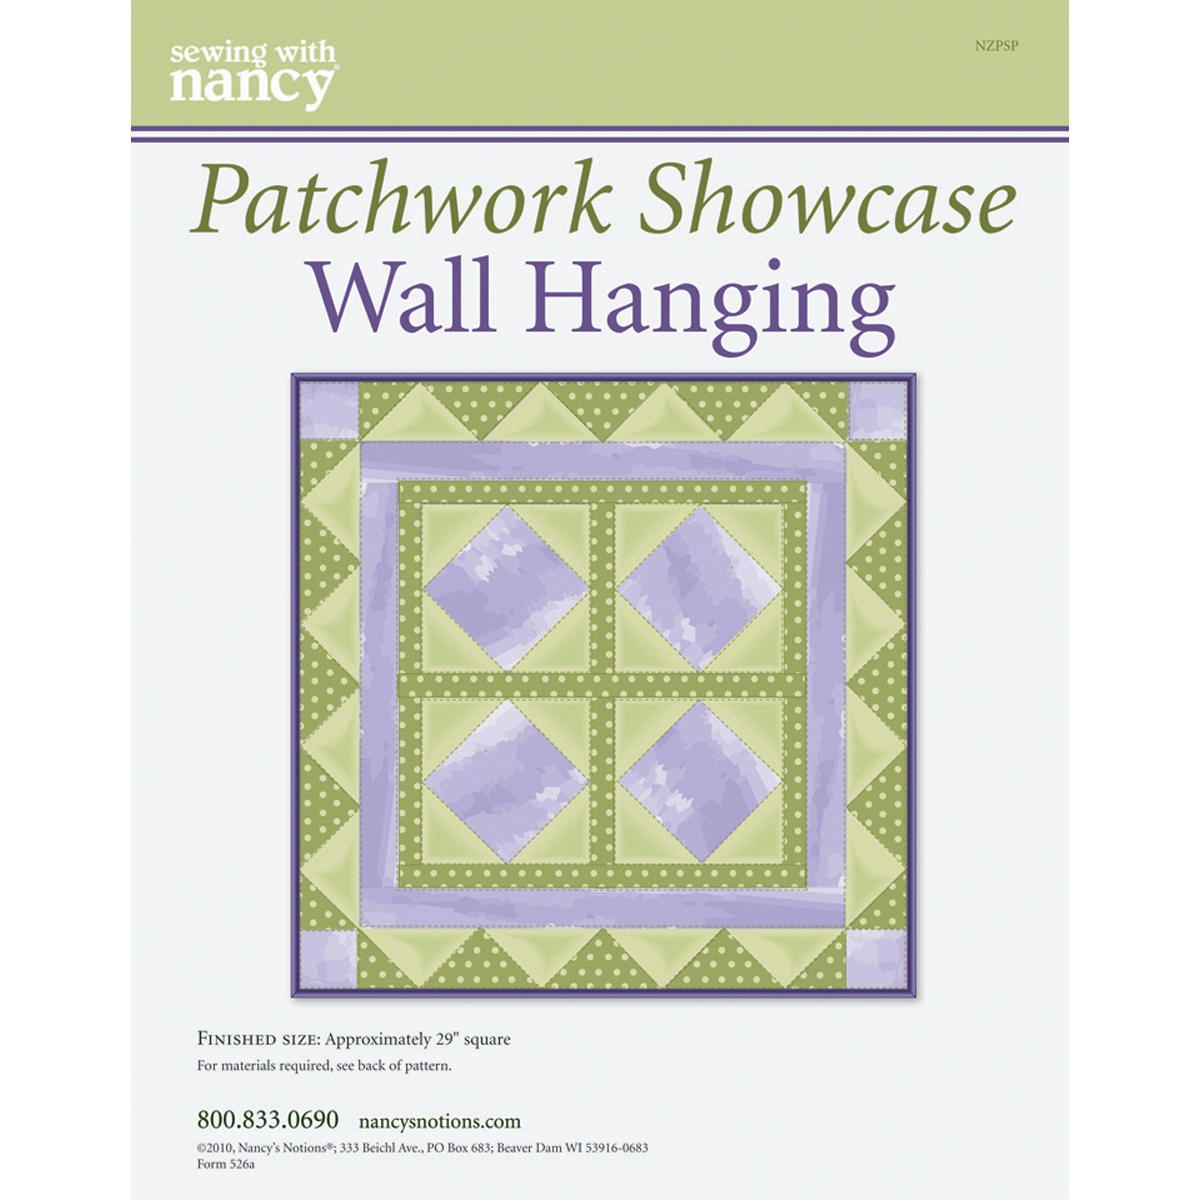 Patchwork Showcase Wall Hanging Pattern from Sewing With Nancy CLOSEOUT